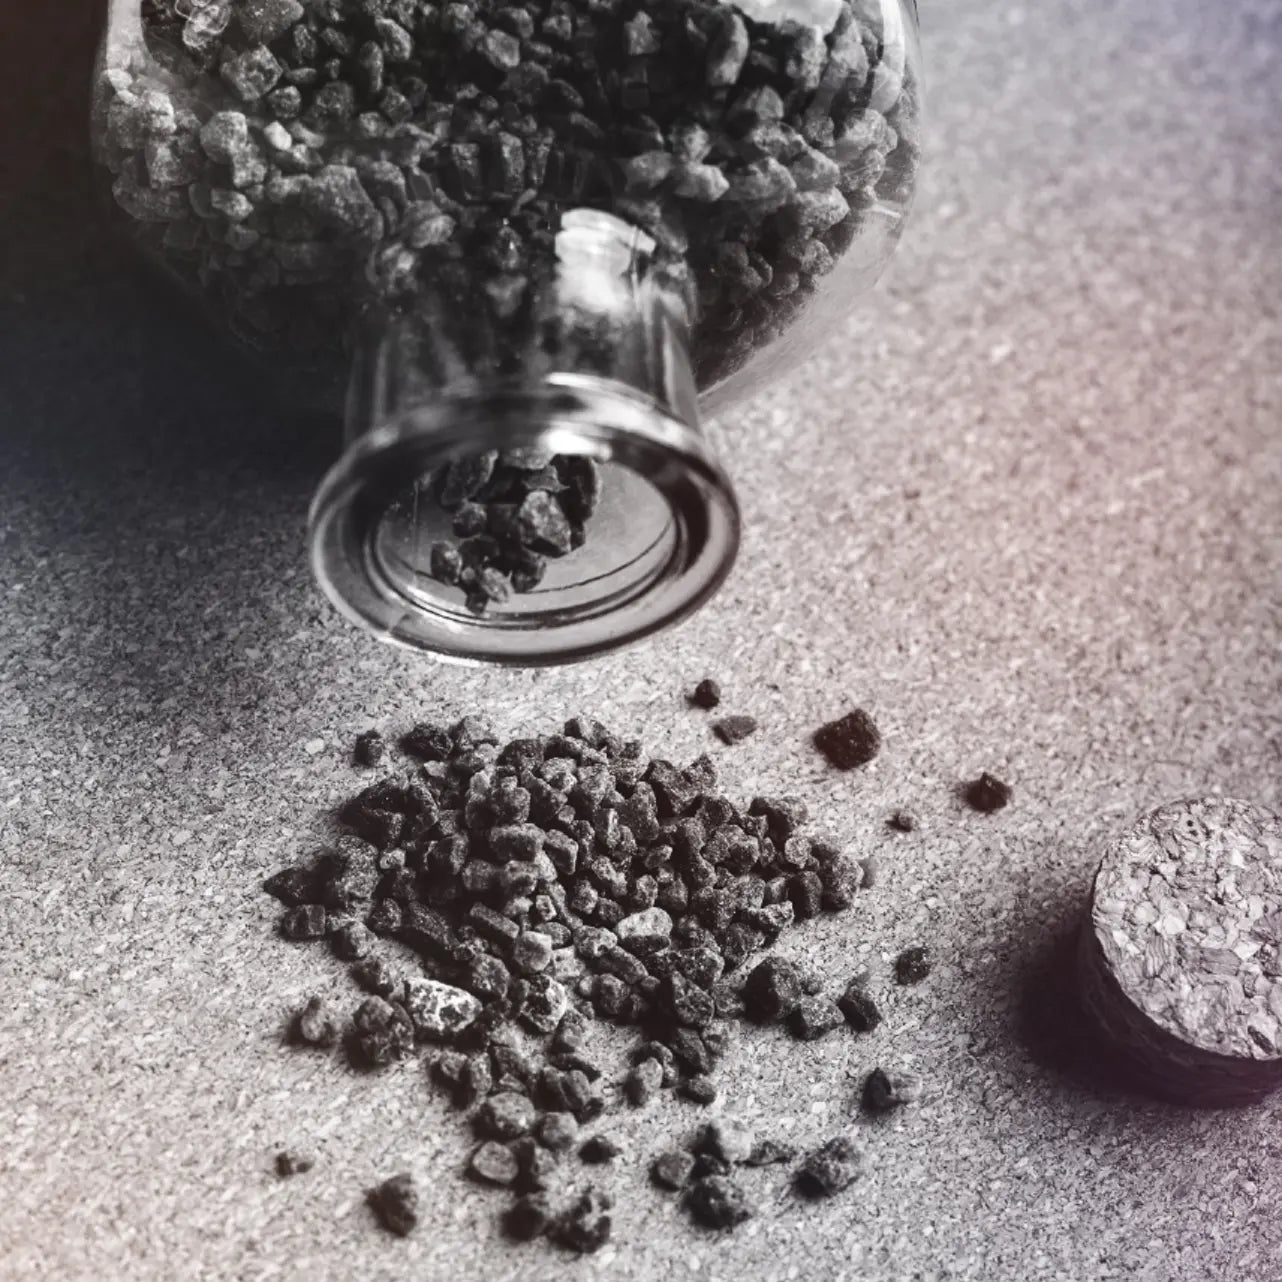 Benefits of Activated Charcoal